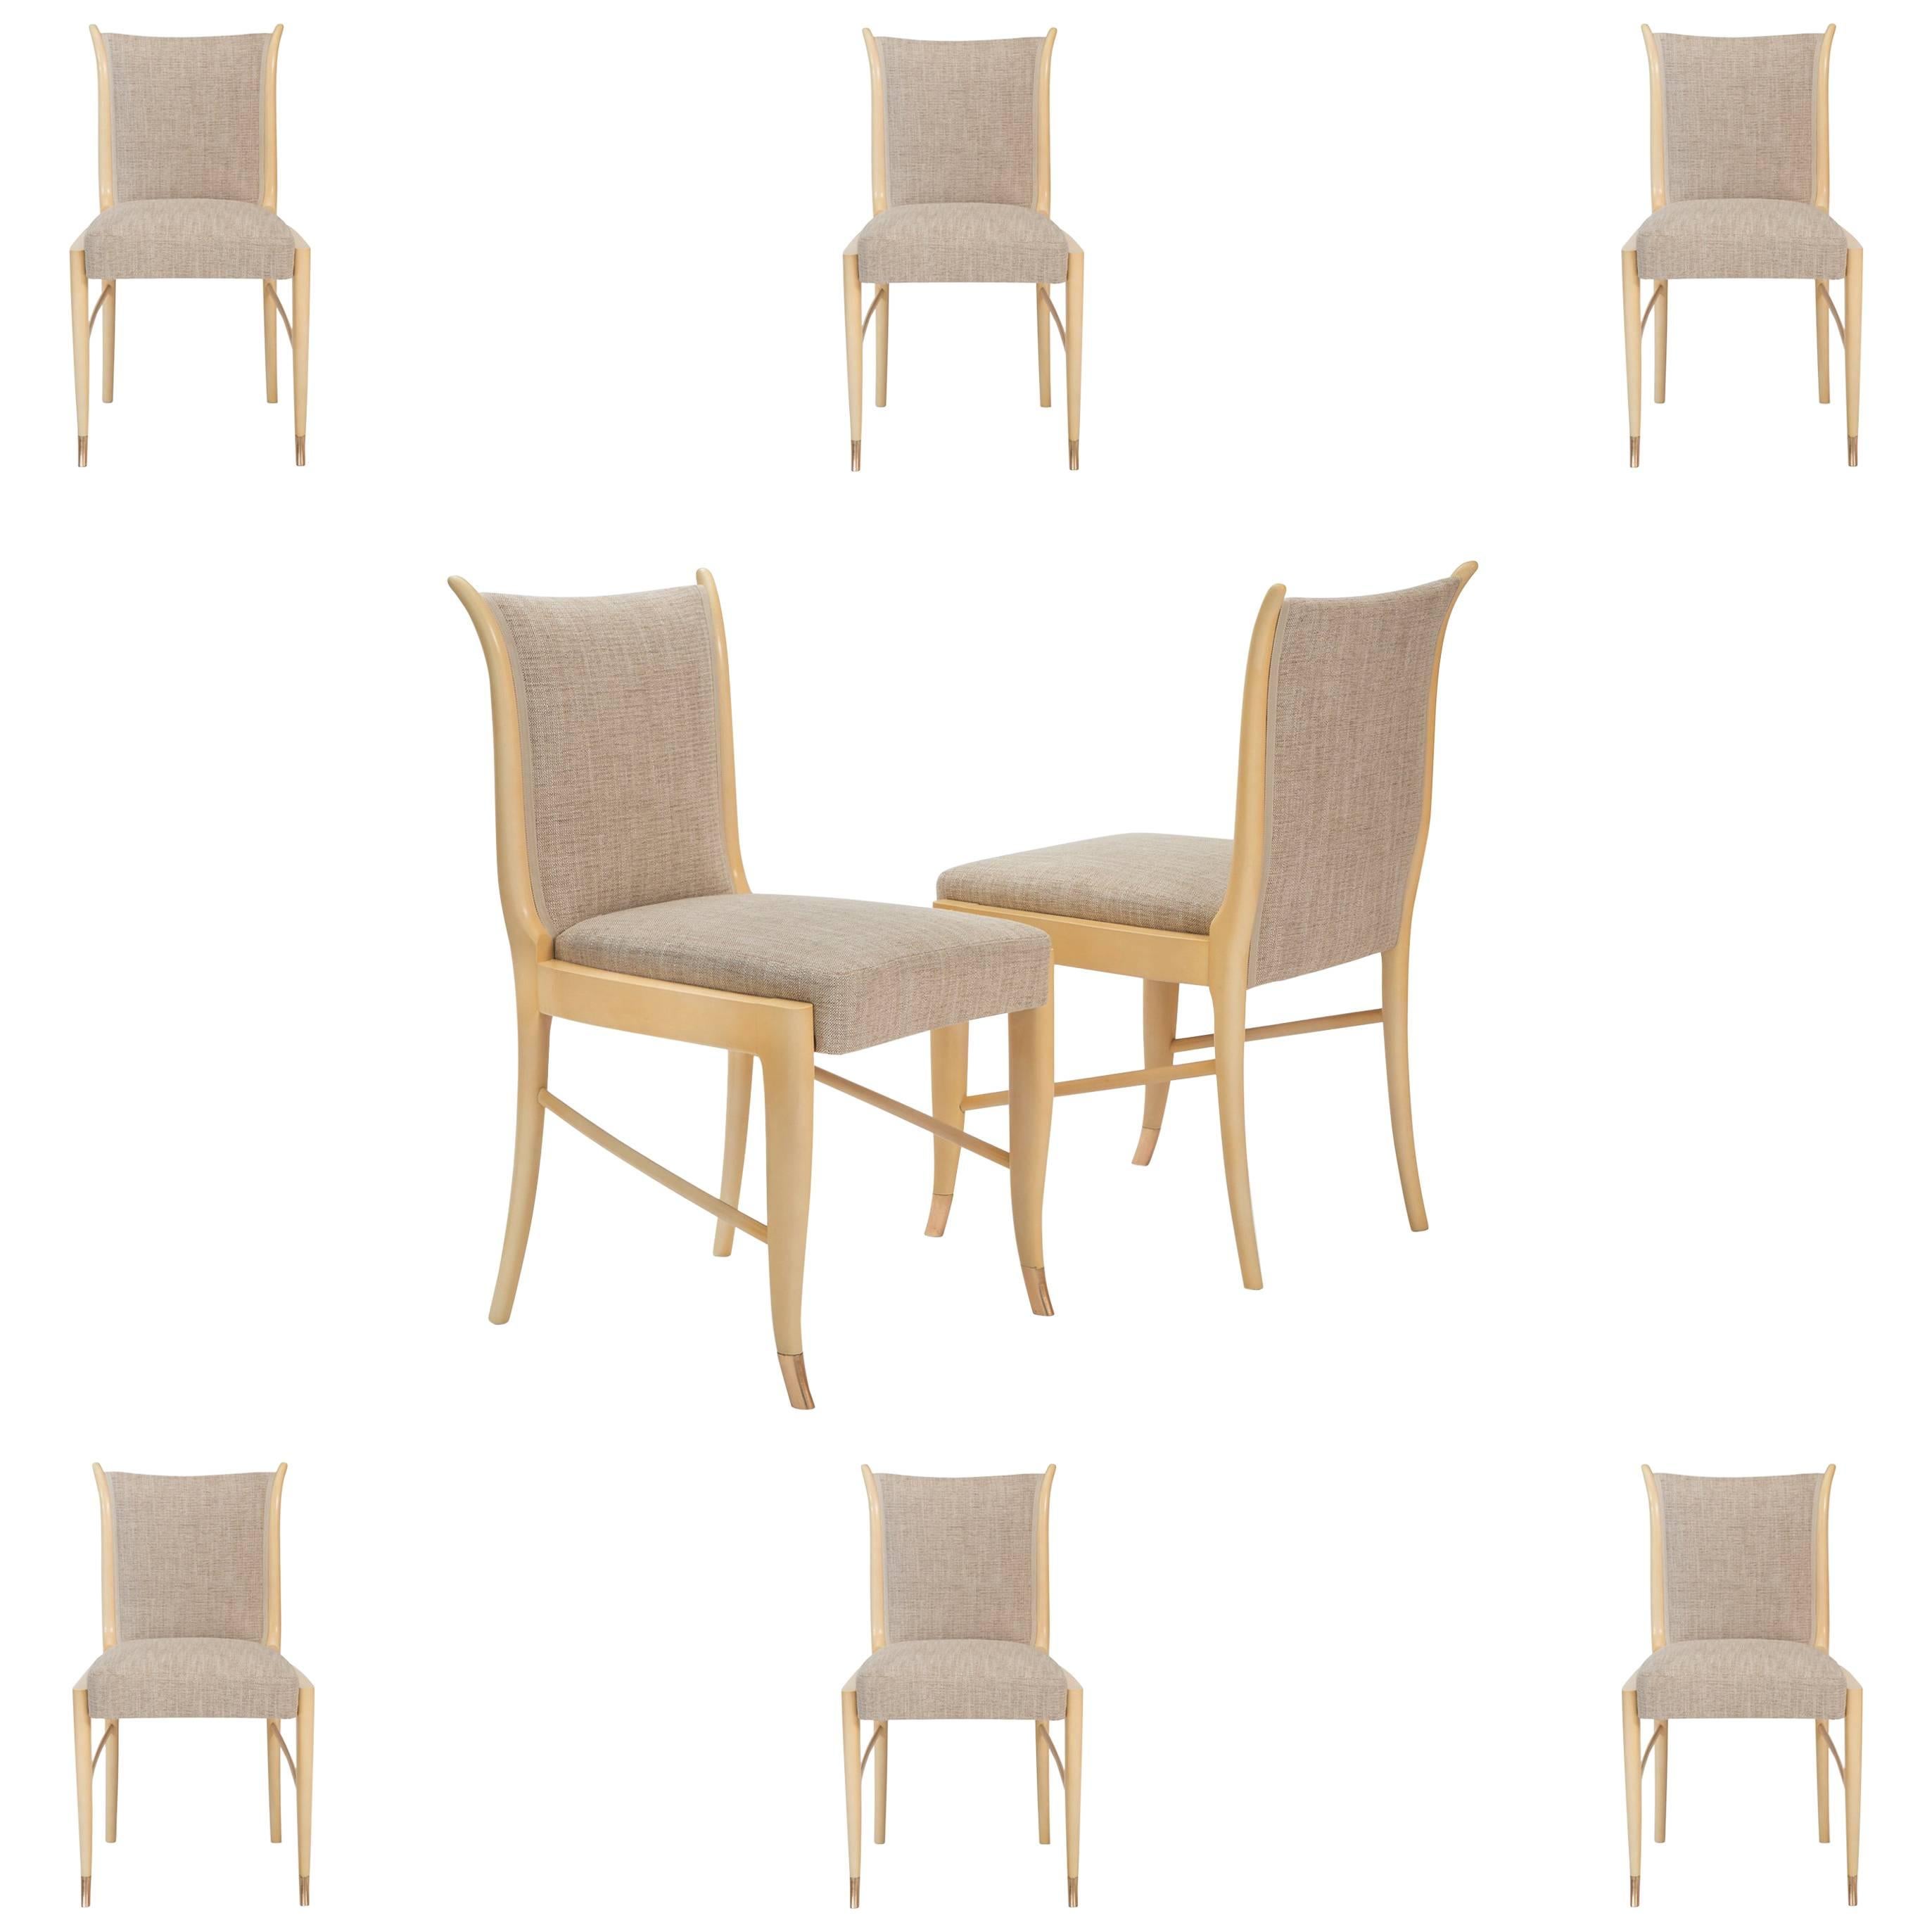 Guglielmo Ulrich, Attributed, Set of 8 Italian Lacquered and Upholstered Chairs